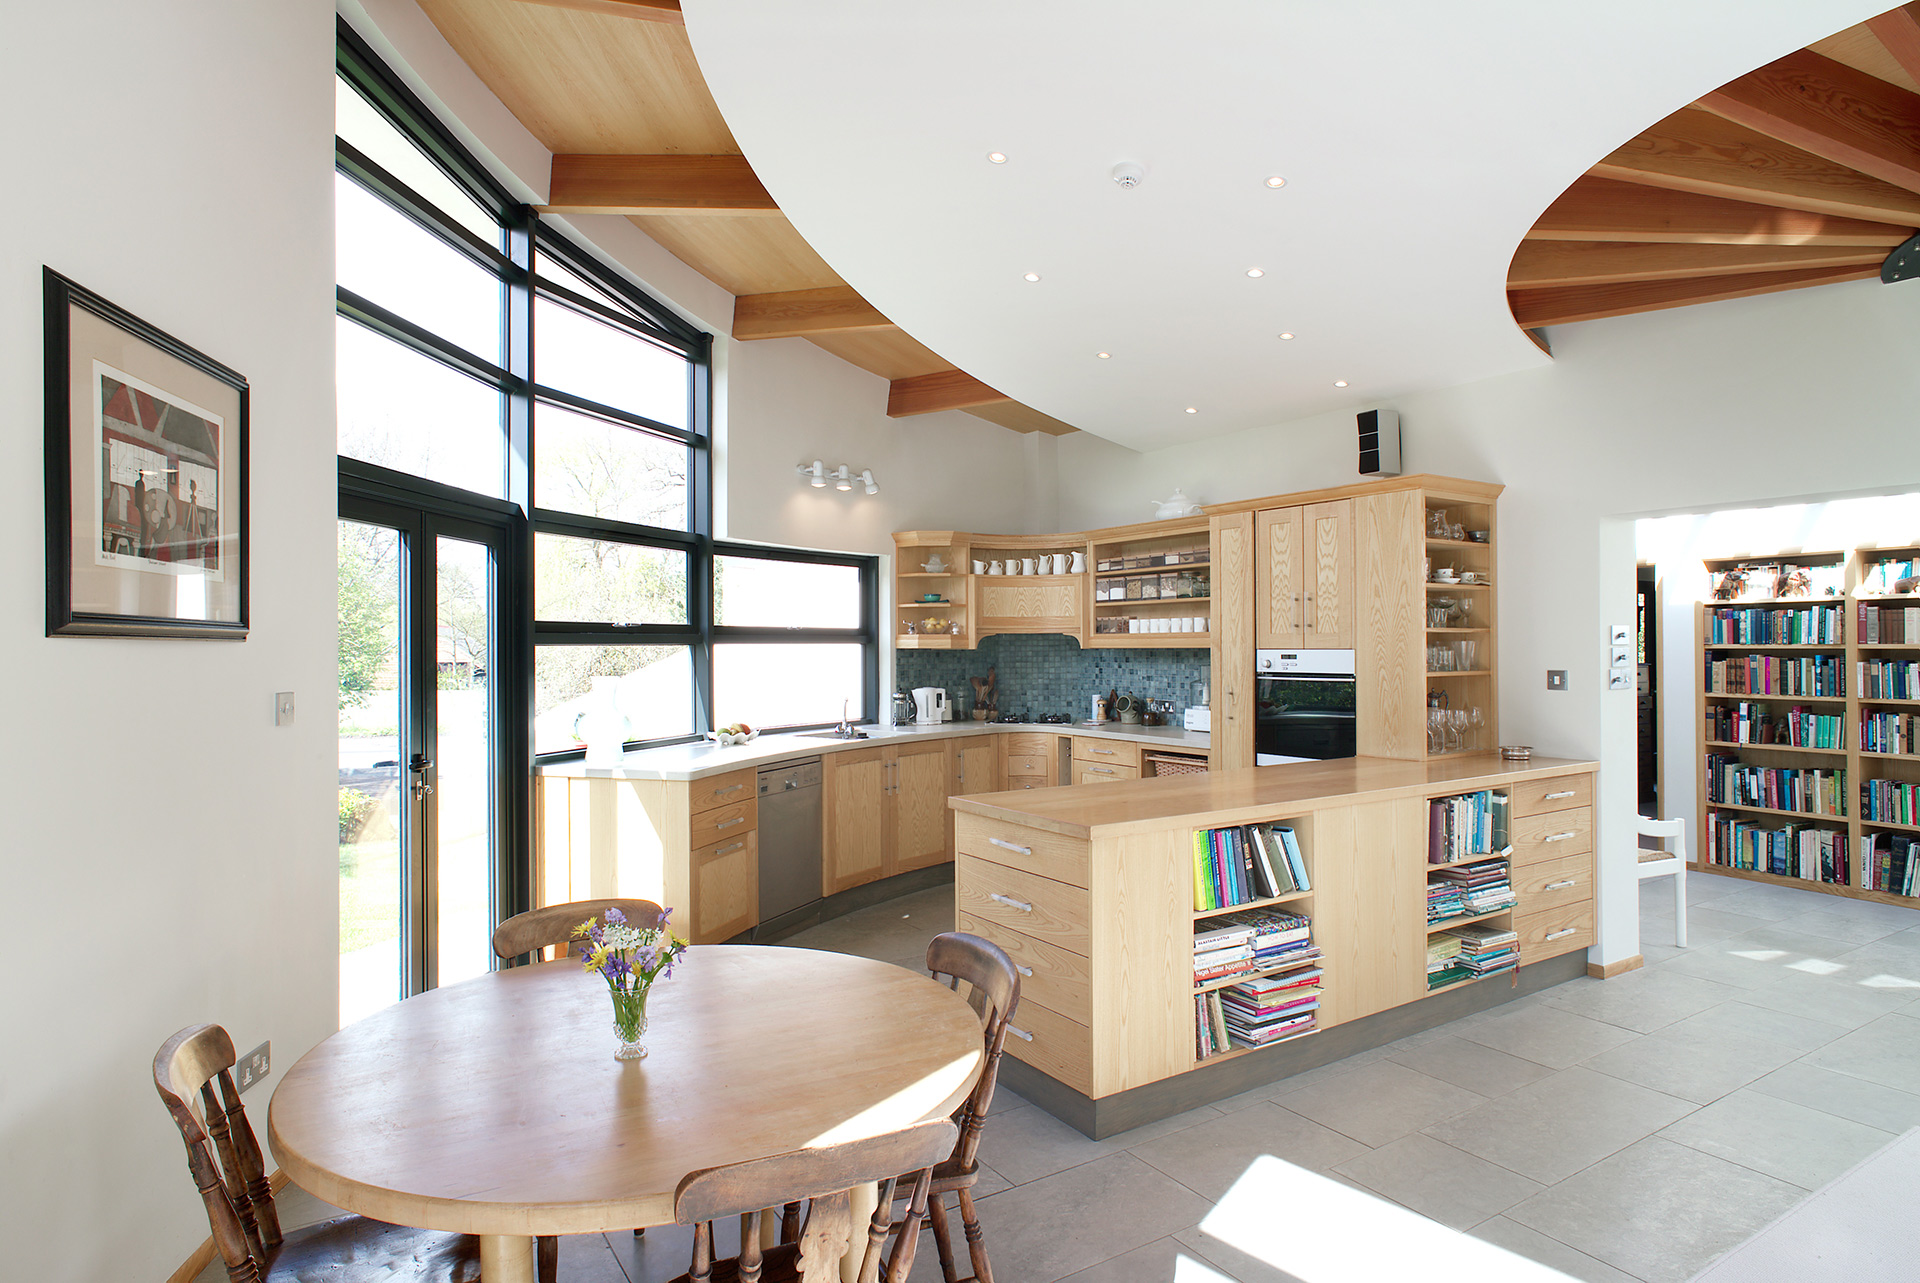 open plan kitchen and living space with curved wall and exposed beams